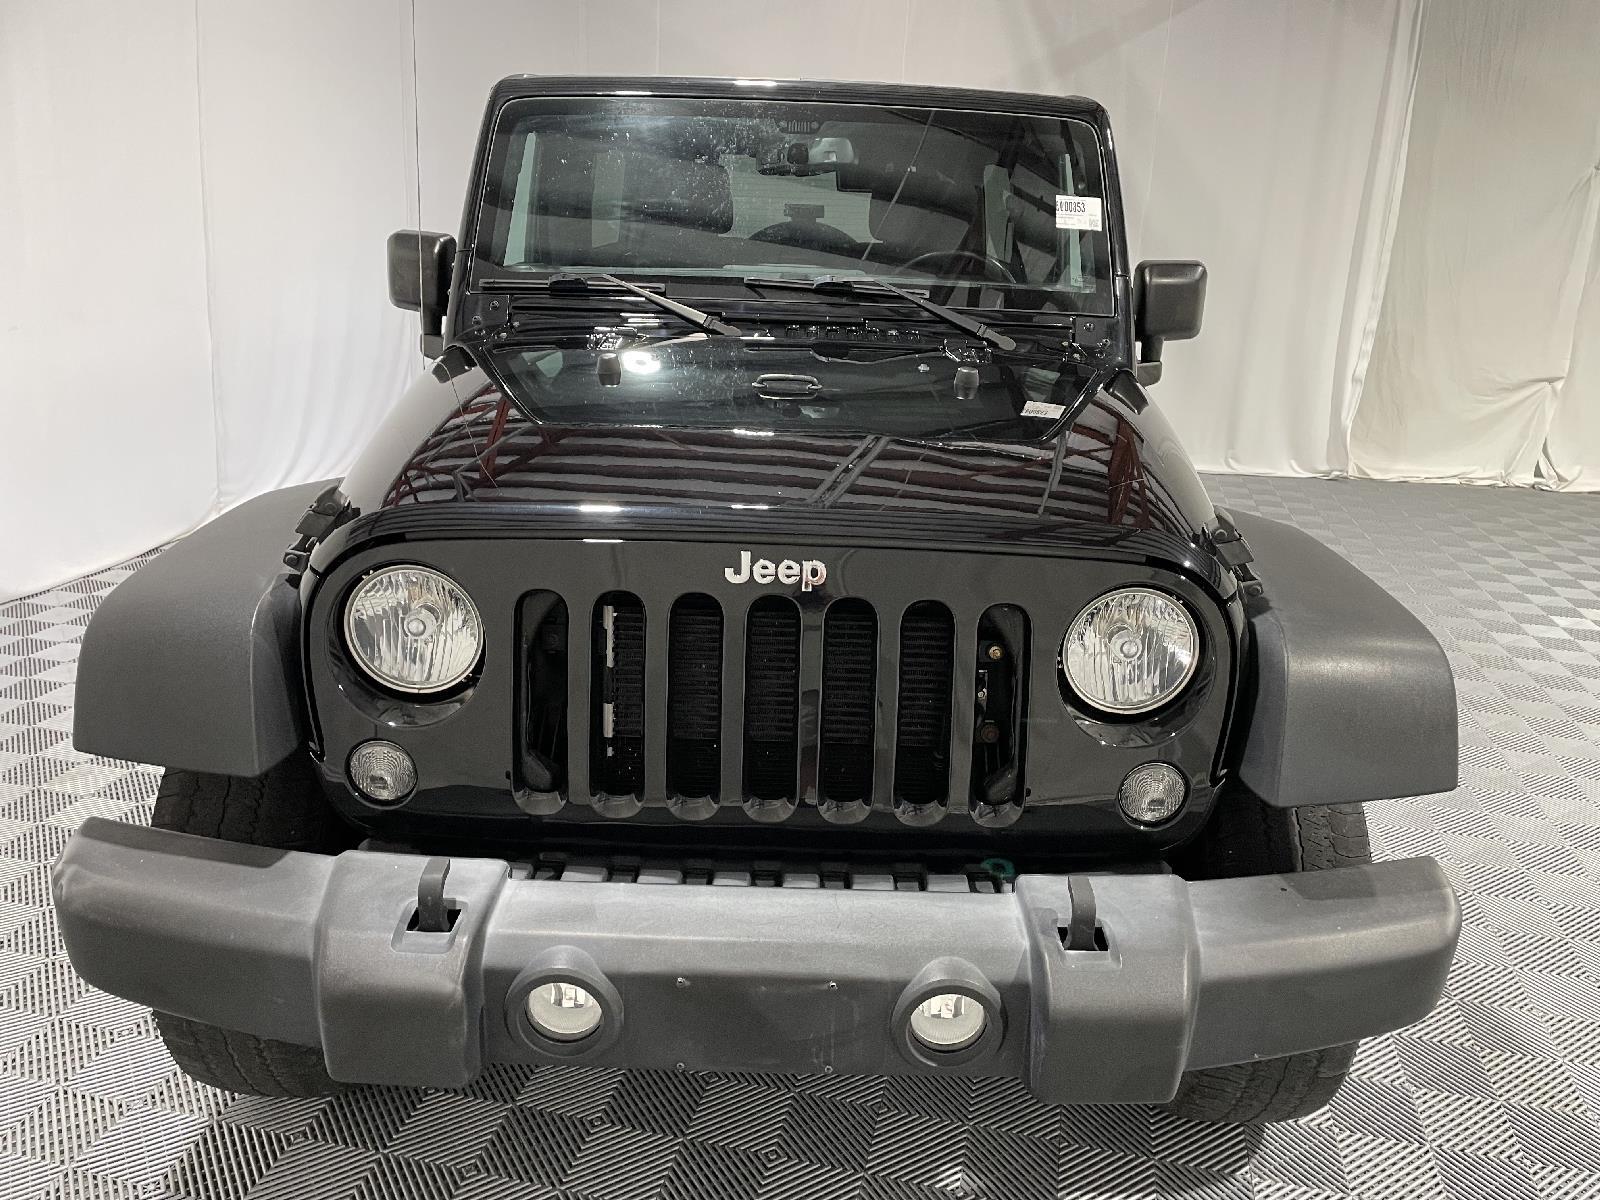 Used 2018 Jeep Wrangler JK Unlimited Sport S SUV for sale in St Joseph MO